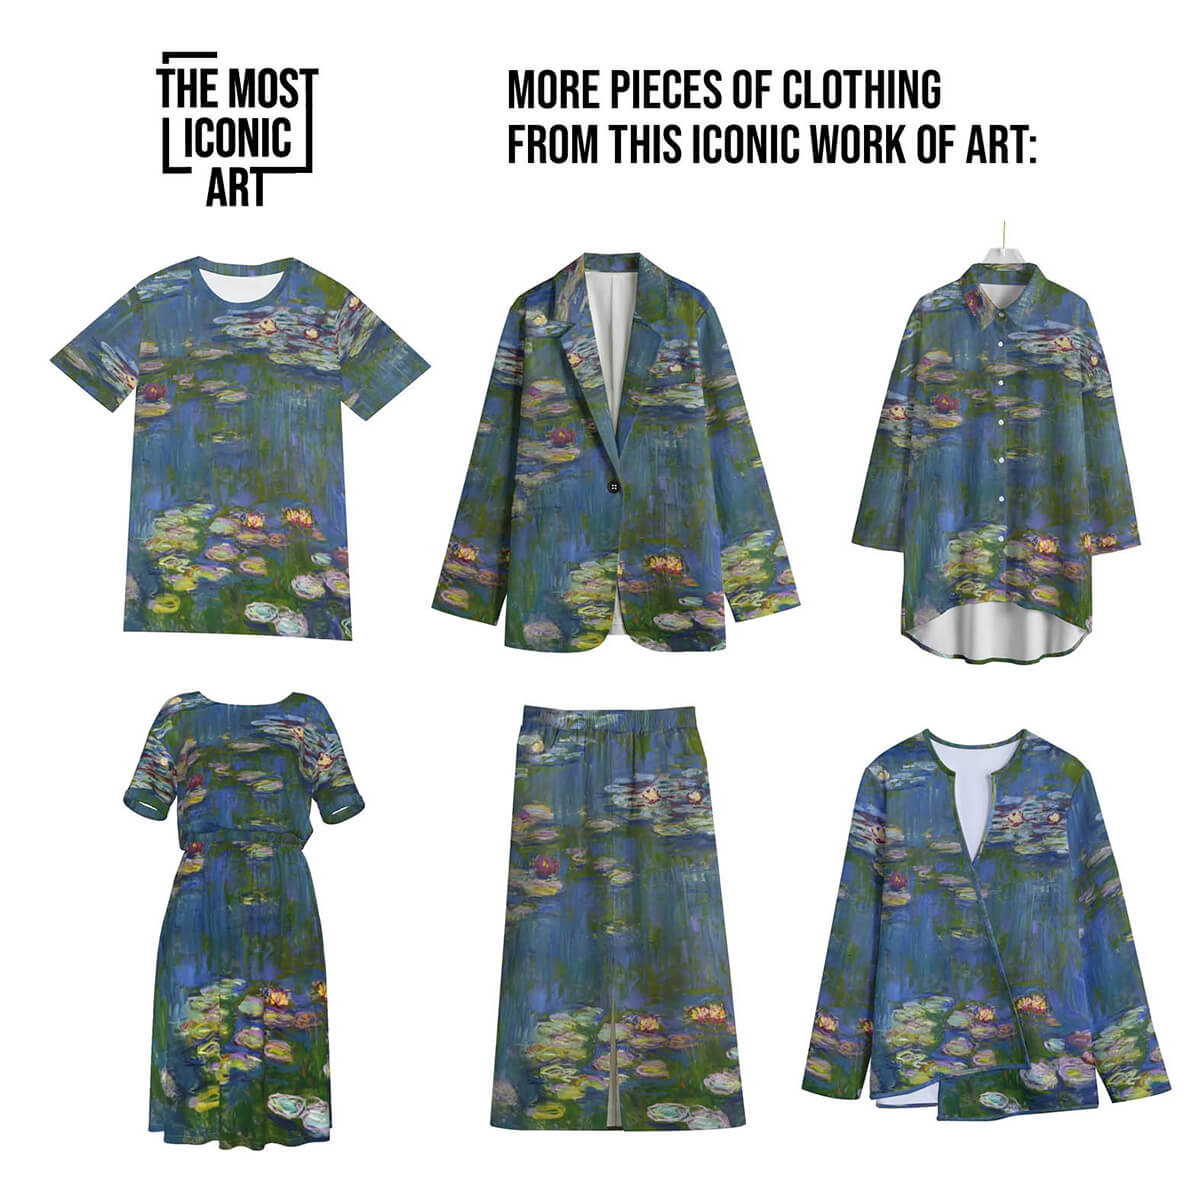 Stunning Claude Monet inspired water lilies clothing